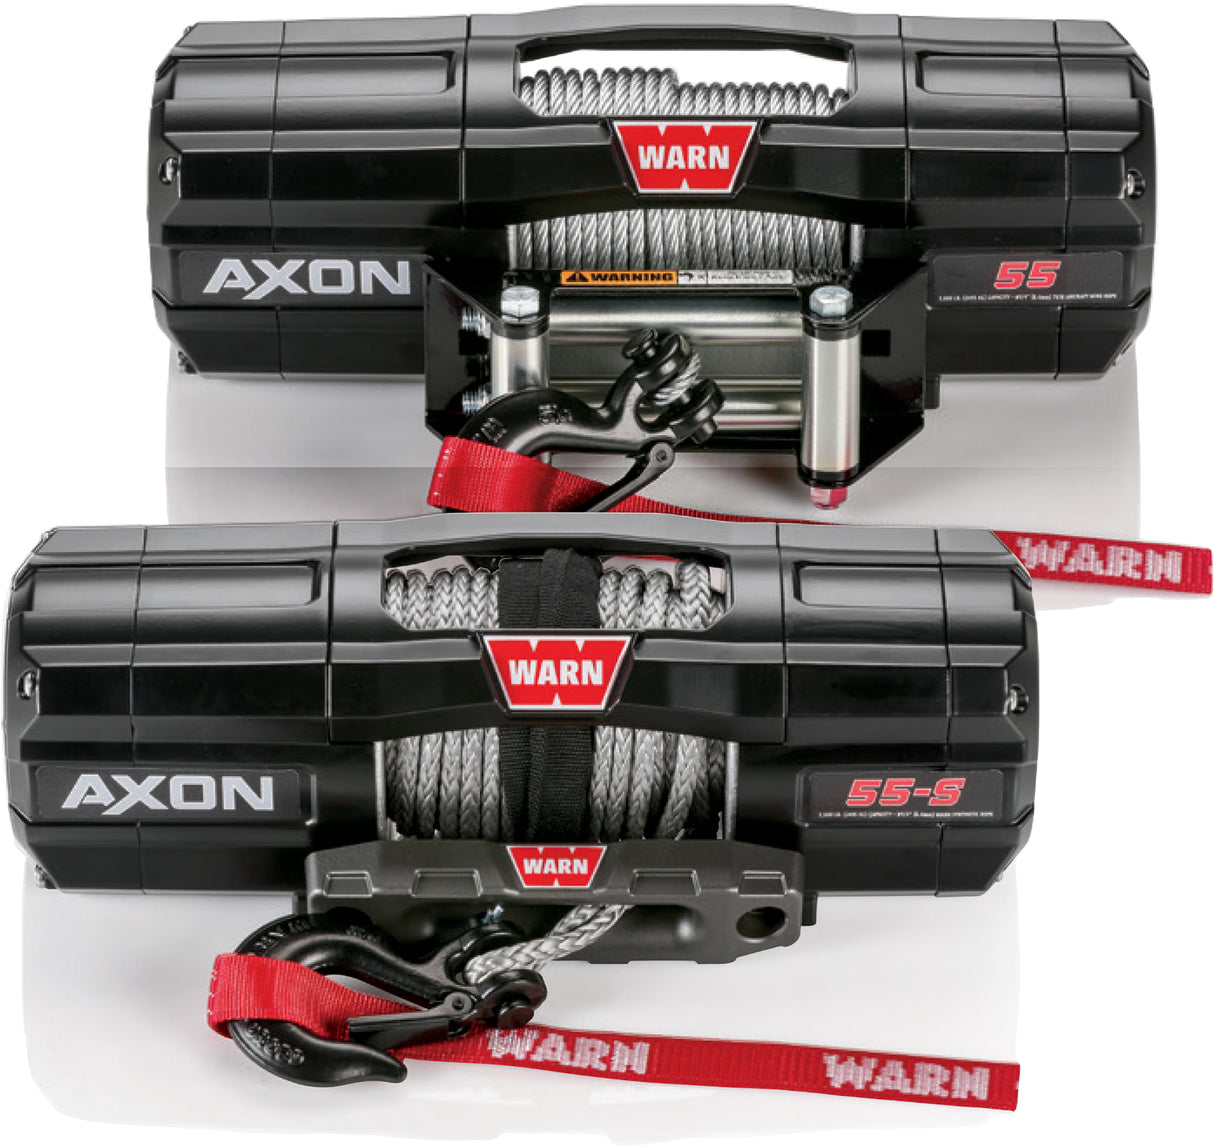 WARN Axon 45rc Syn Rope Winch for Powersports